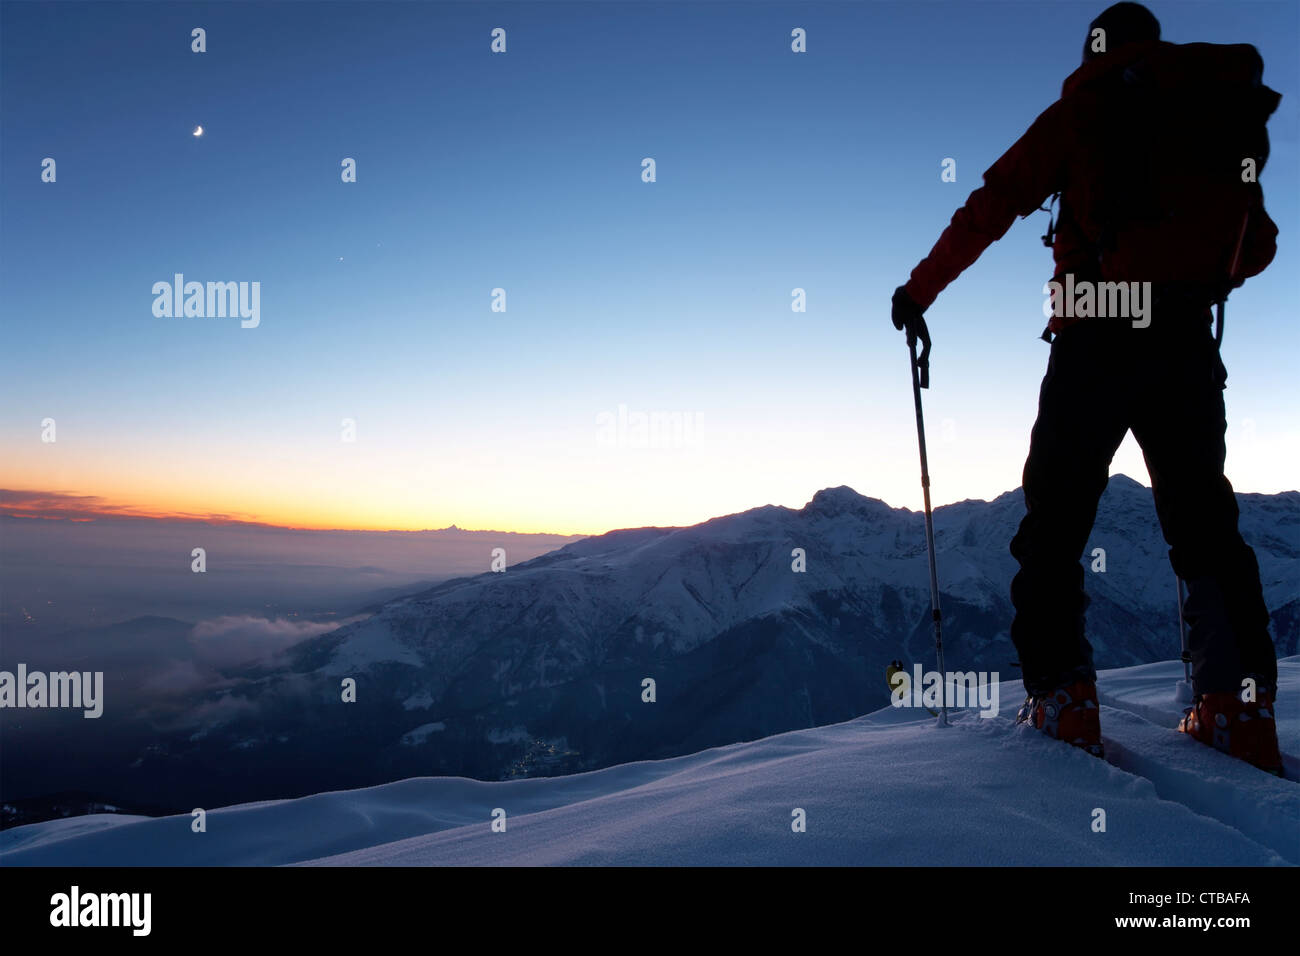 At dusk brave backcountry skier reaching summit mountain after long day walking in wilderness Adventure exploration concept Stock Photo